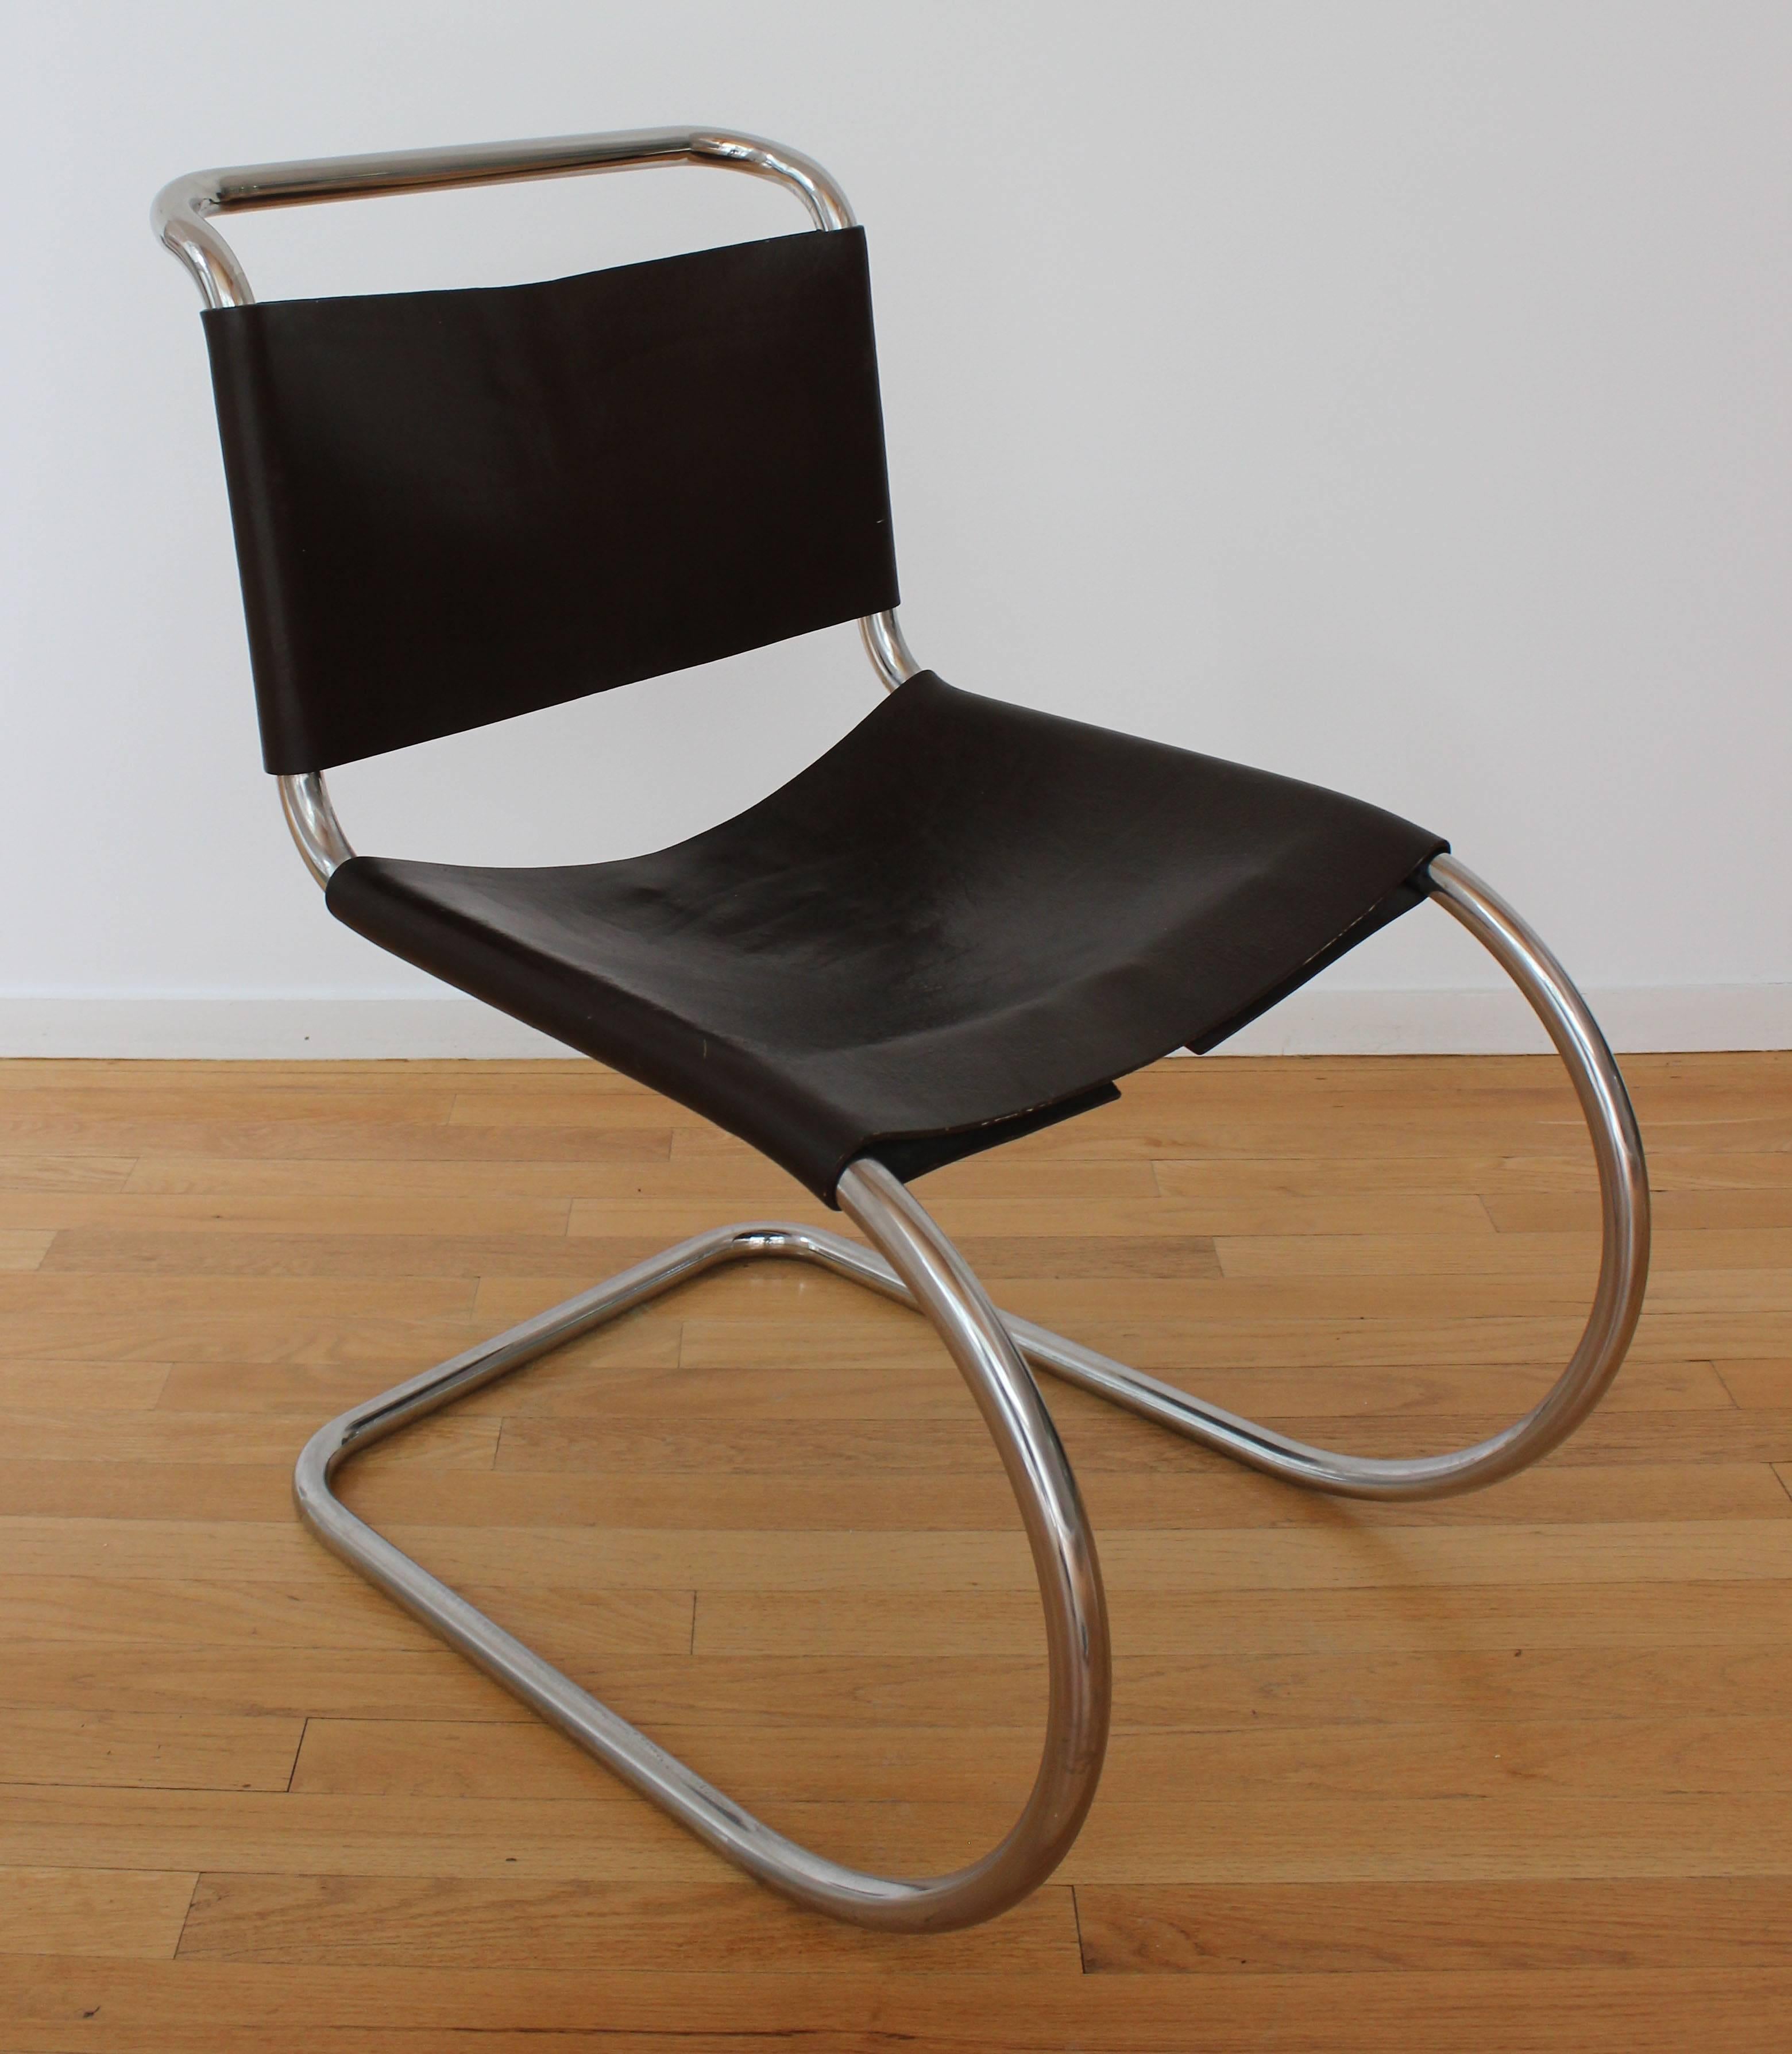 Classic set of tubular chrome MR chairs, originally designed in 1927, by Ludwig Mies van der Rohe in vintage original chocolate brown leather.

Original owner bought from Knoll, 1973.

Complimentary delivery within 30 miles.